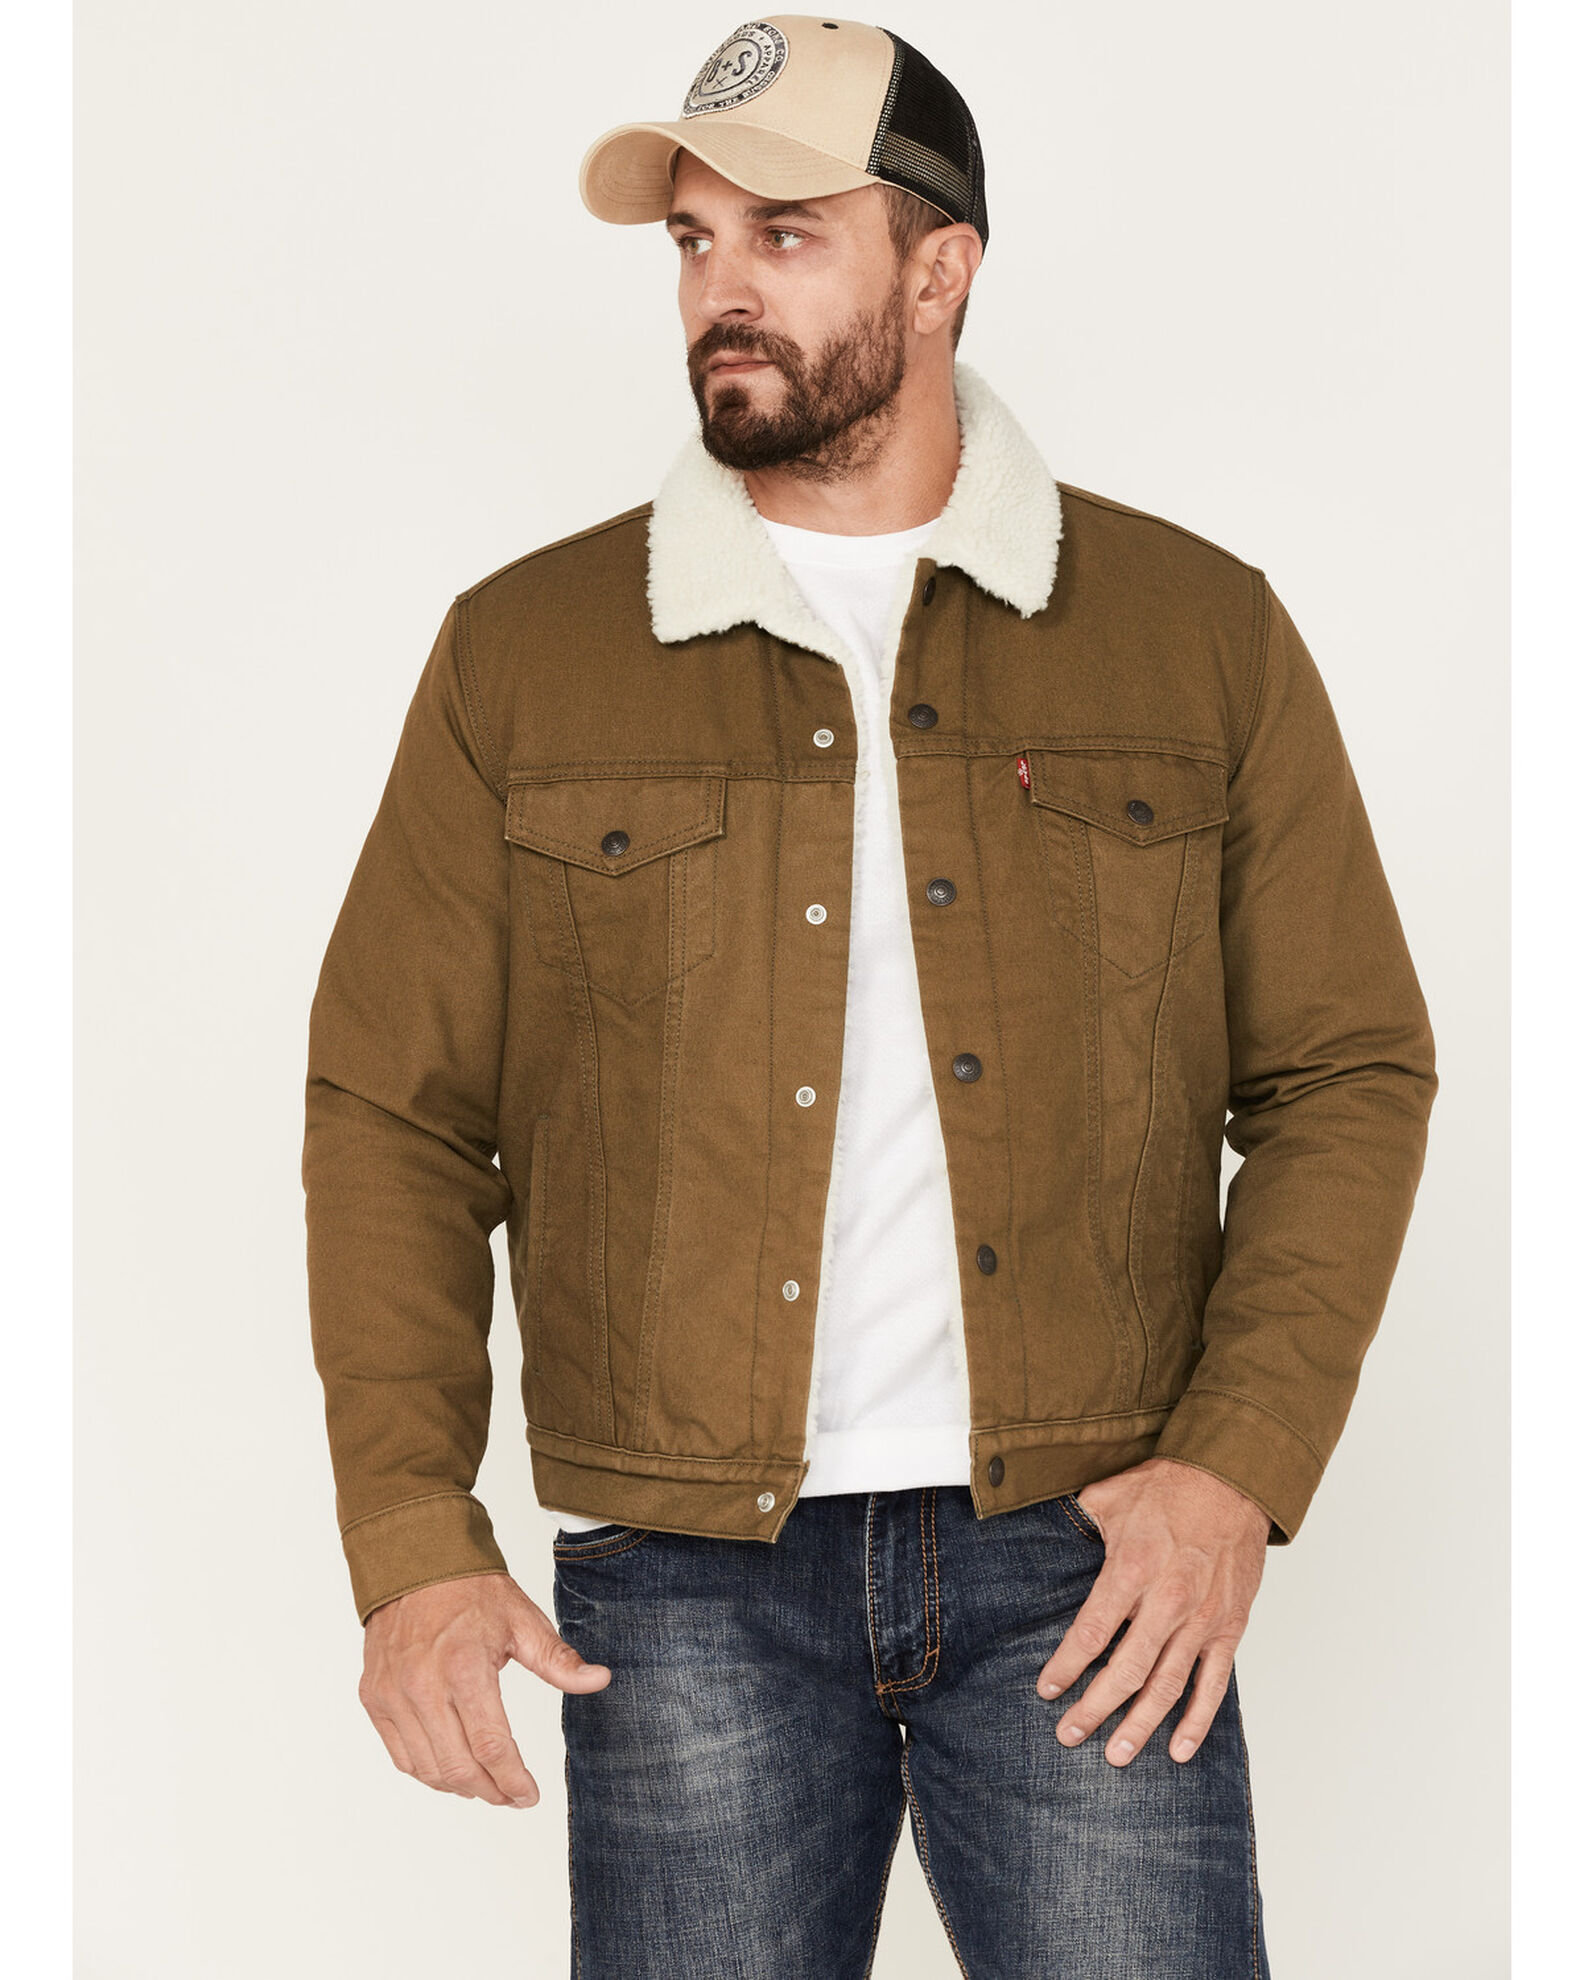 Levi's Men's Sherpa Lined Trucker Jacket - Country Outfitter